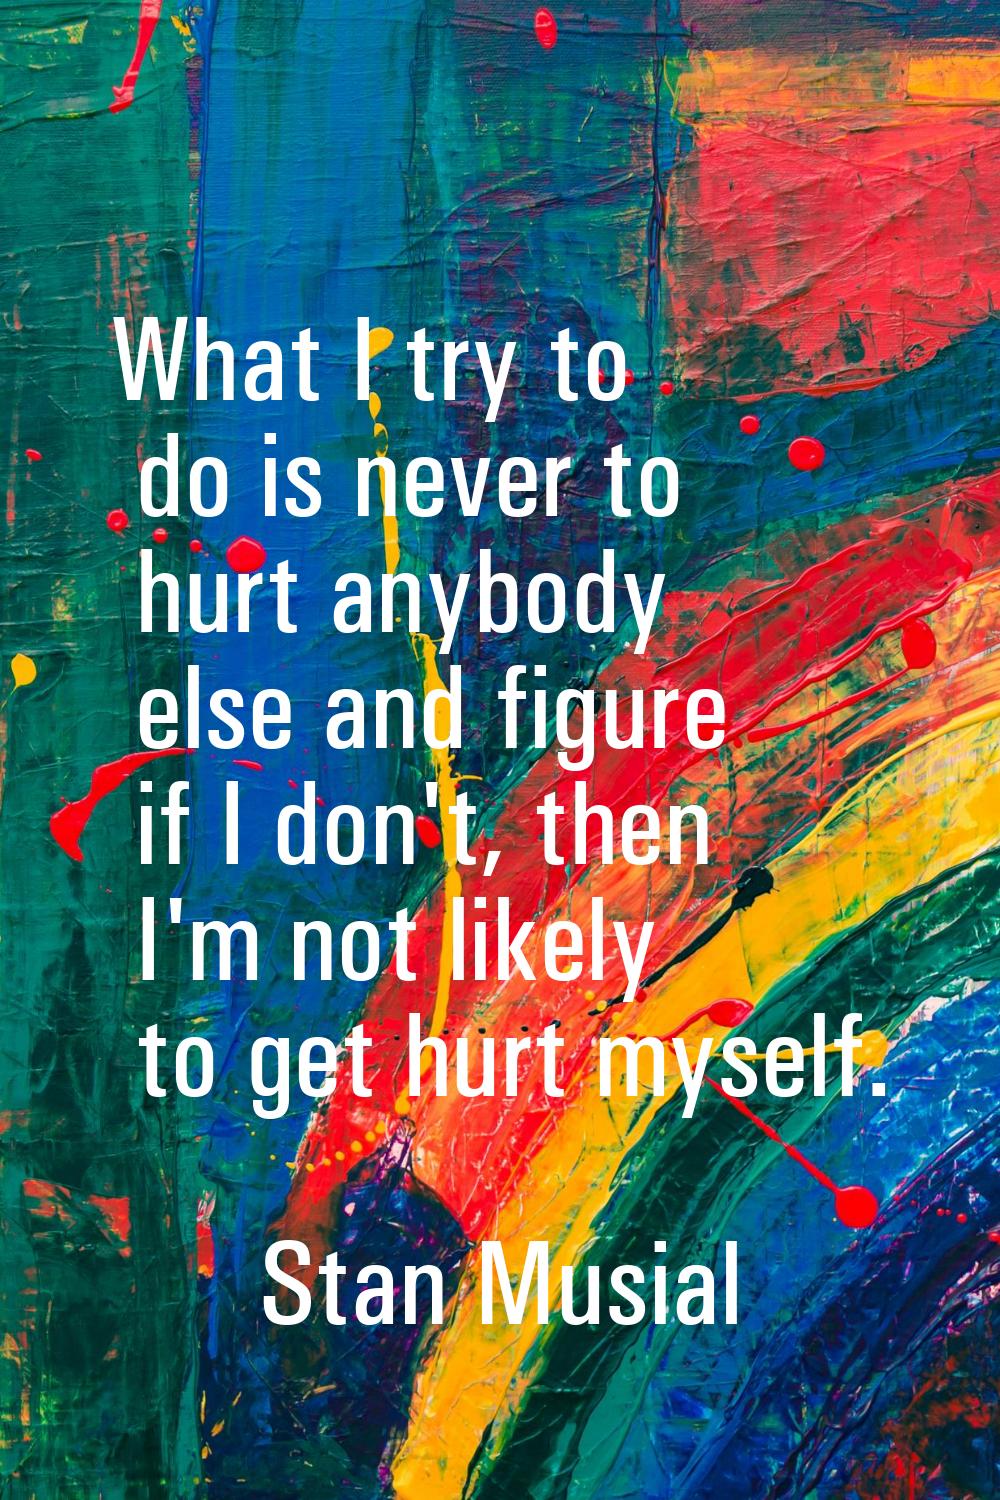 What I try to do is never to hurt anybody else and figure if I don't, then I'm not likely to get hu